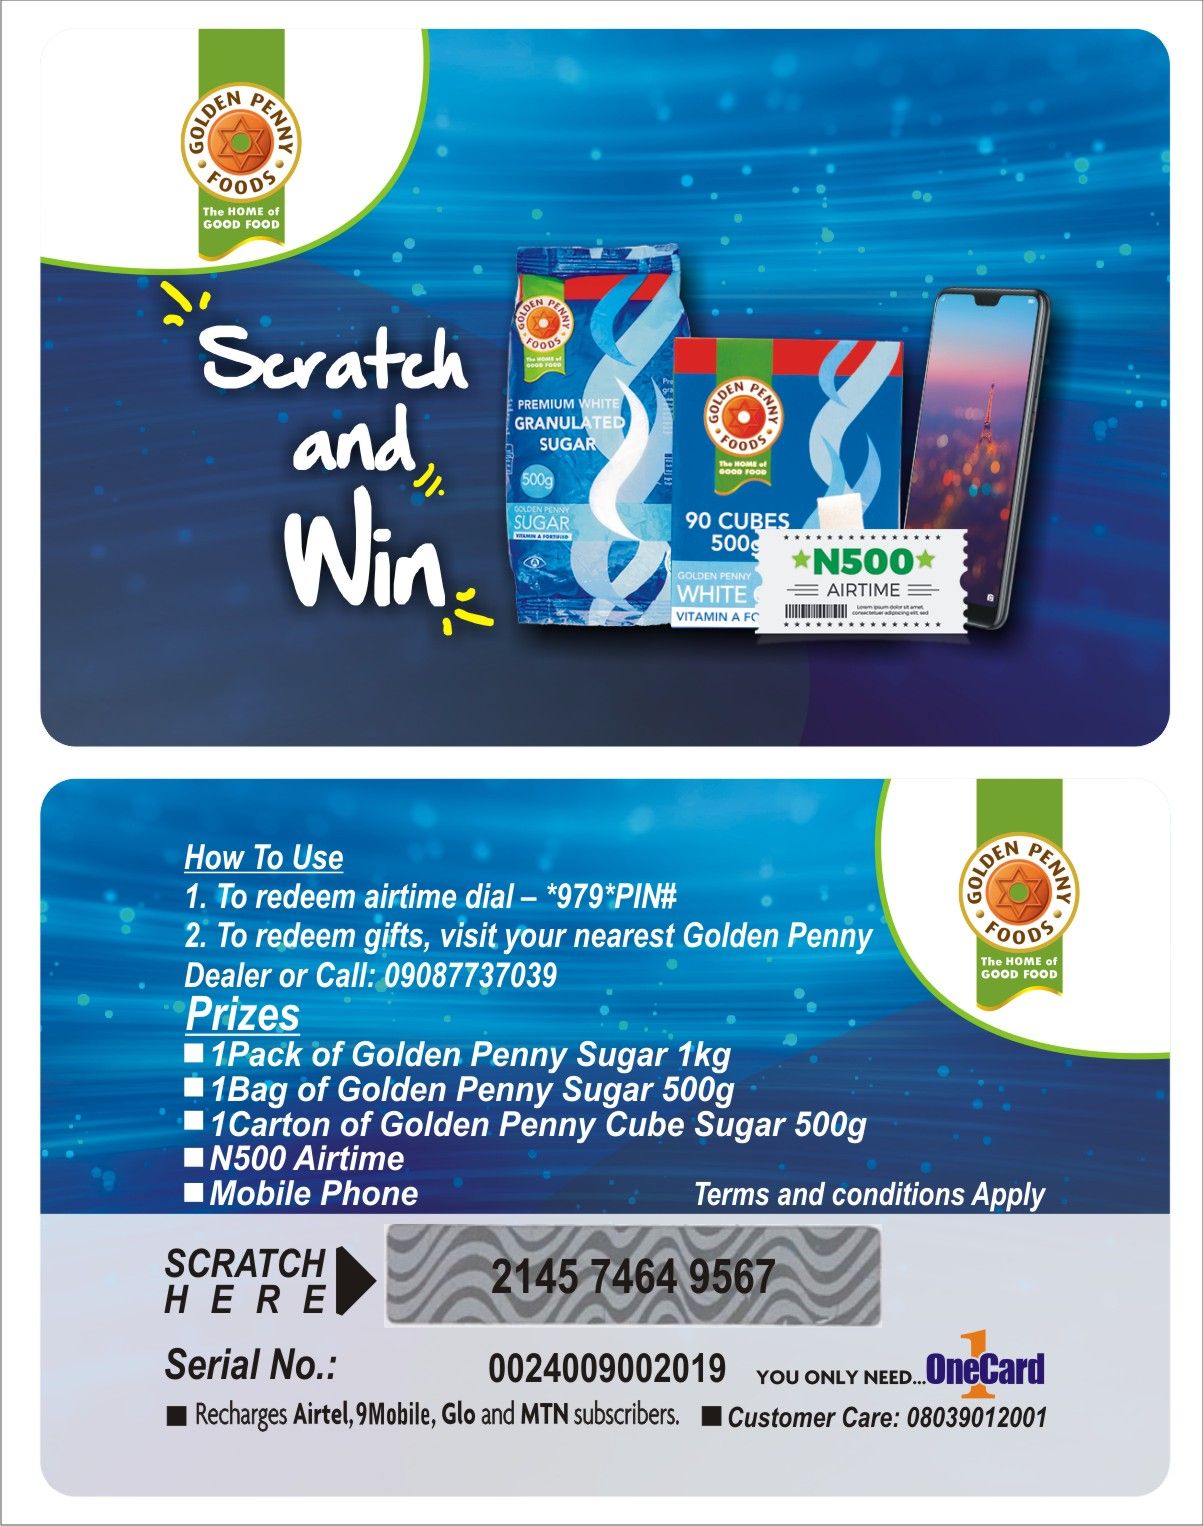 FOR BETTER VISIBILTY OF YOUR BRANDS USE SCRATCH CARDS CALL CHINEDU ON 08179651585 TO PRINT SCRATCH CARDS